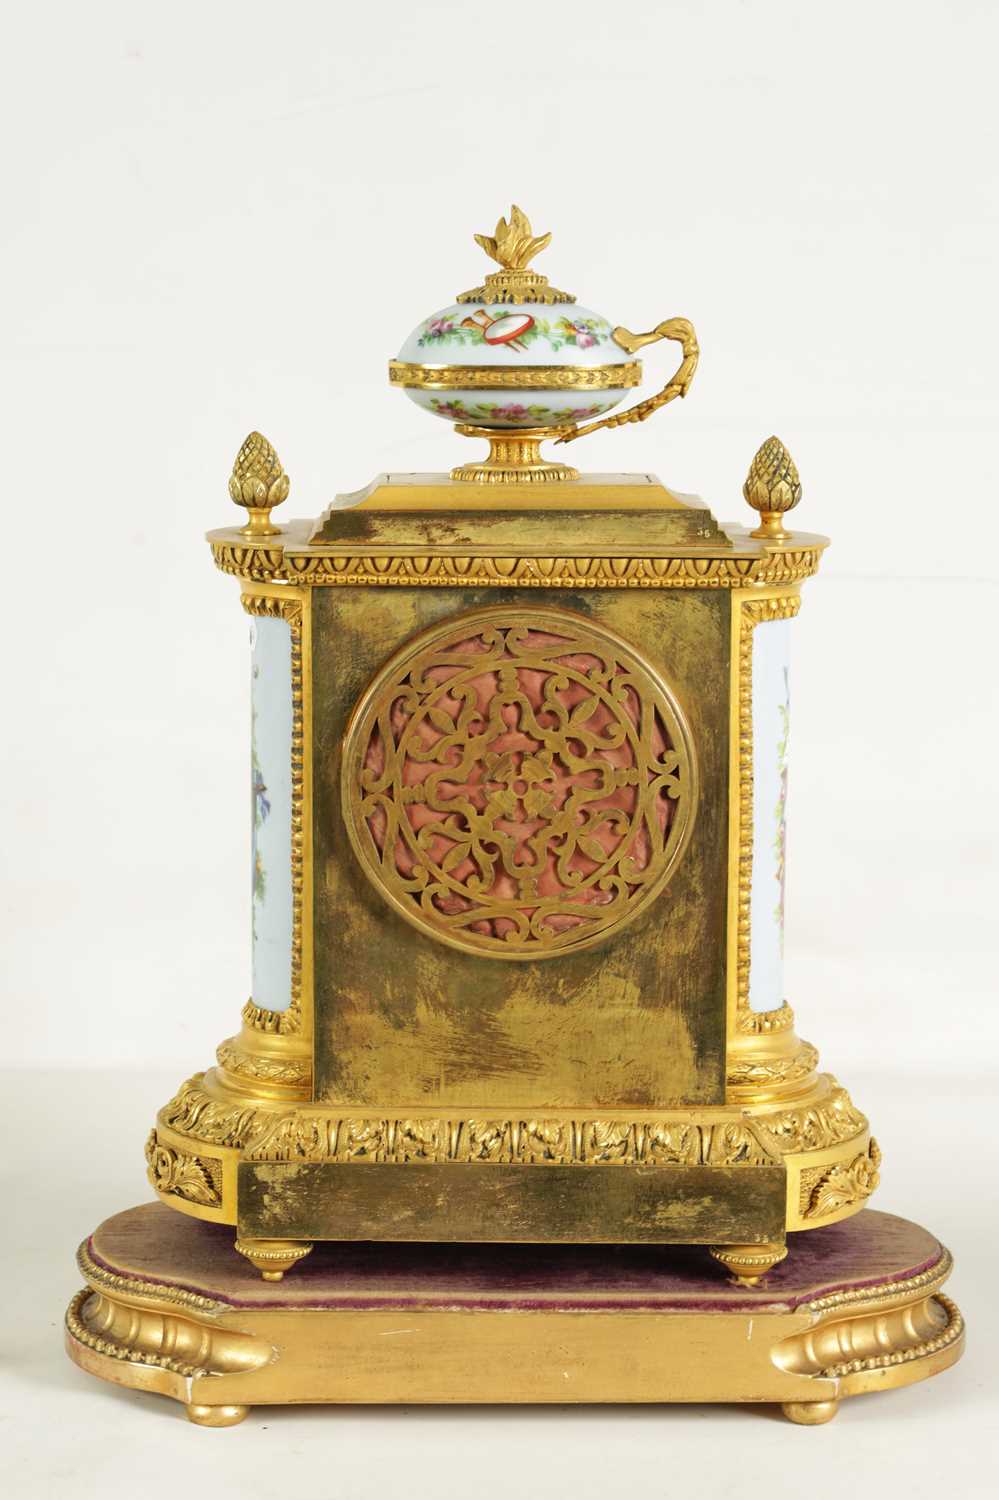 A GOOD QUALITY LATE 19TH CENTURY FRENCH ORMOLU AND PORCELAIN PANELLED MANTEL CLOCK - Image 8 of 11